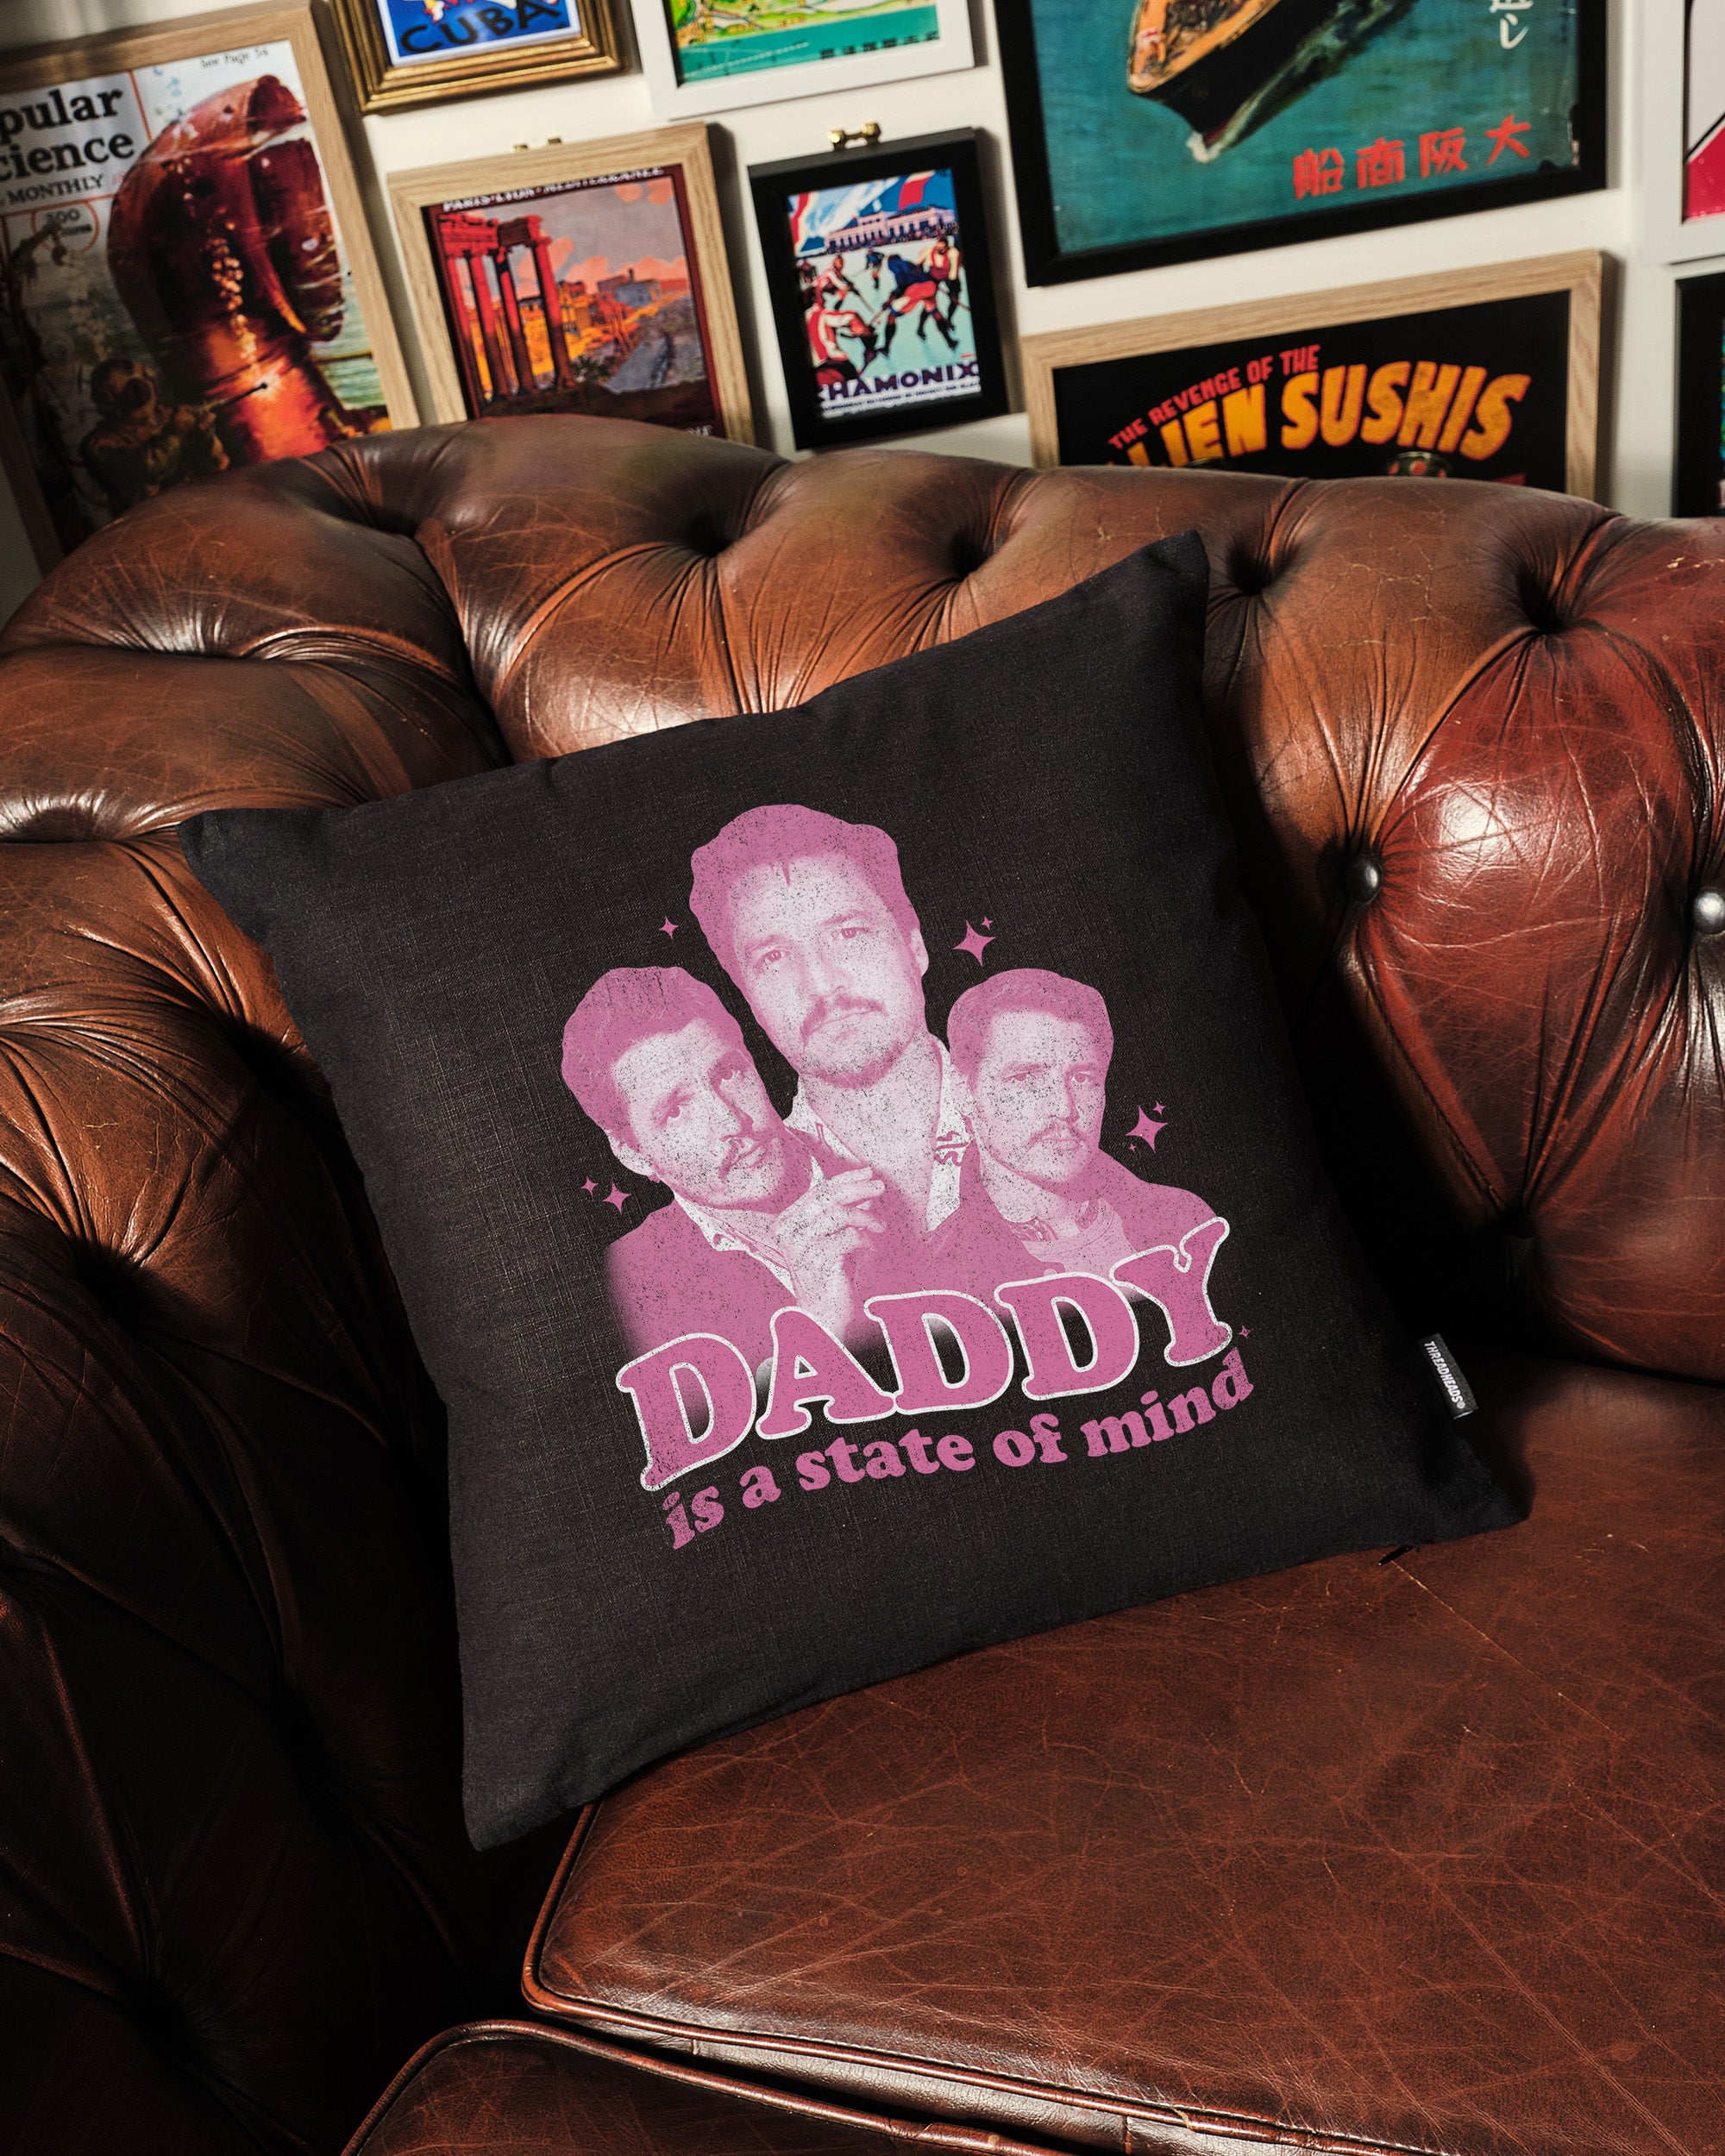 Daddy Is a State of Mind Cushion